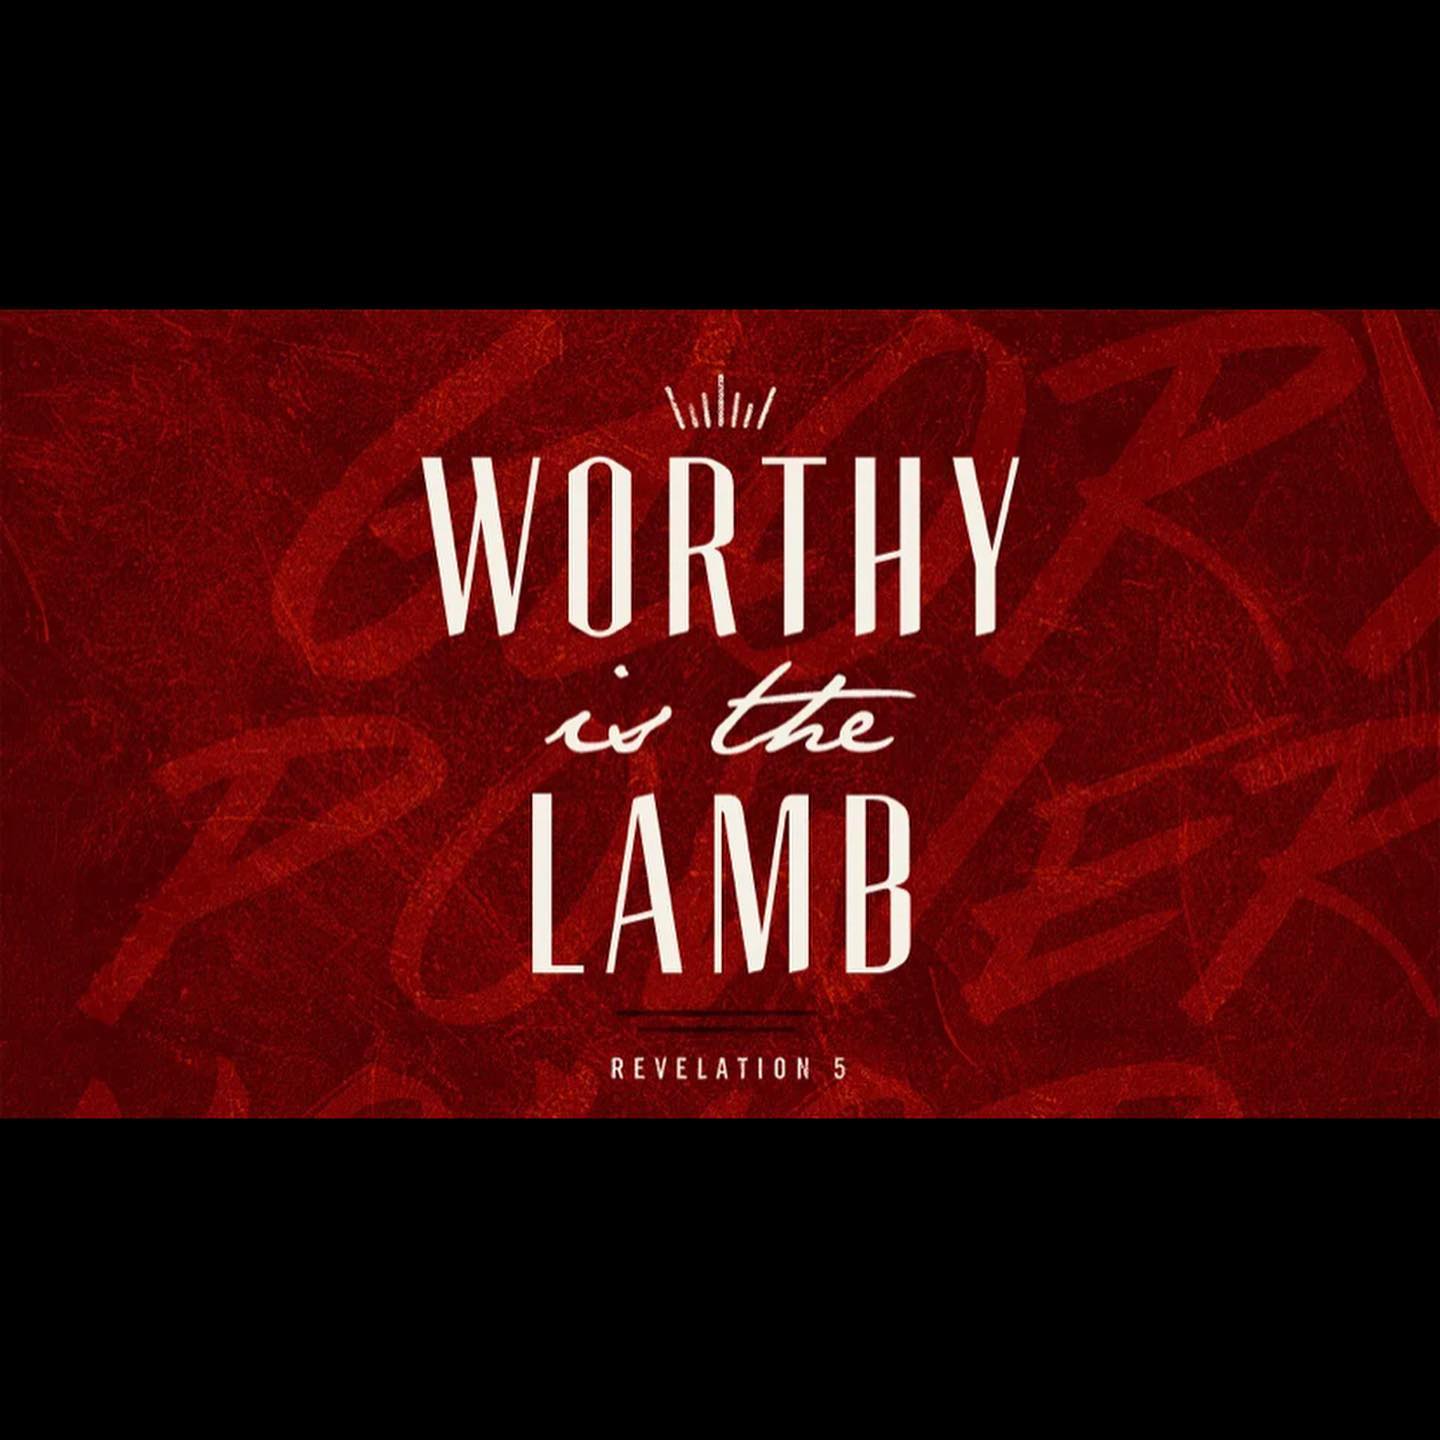 One of the paths to revival is authentic worship. The book of Revelation reveals Jesus in all his glory… Worthy is the Lamb who was slainHoly holy is HeSing a new songTo Him who sits onHeavens mercy seatJoin us Sunday 10AM @fallbrookvineyardchurch as Ethiopian missionary Pastor Rick Eiseman helps us understand Revelation 5! #lionandthelamb#thankful#gratefulness#authenticworship#holyholyholy #relevation5#heaven#growinginfaith#faithinaction#holiness#aliveinchrist#revival#repentance#wordofgod#worship#prayer #praise#praisethelord#community #support #love#familyofgod #outdoorchurch #organicchurch #outlawchurch #dogfriendlychurch